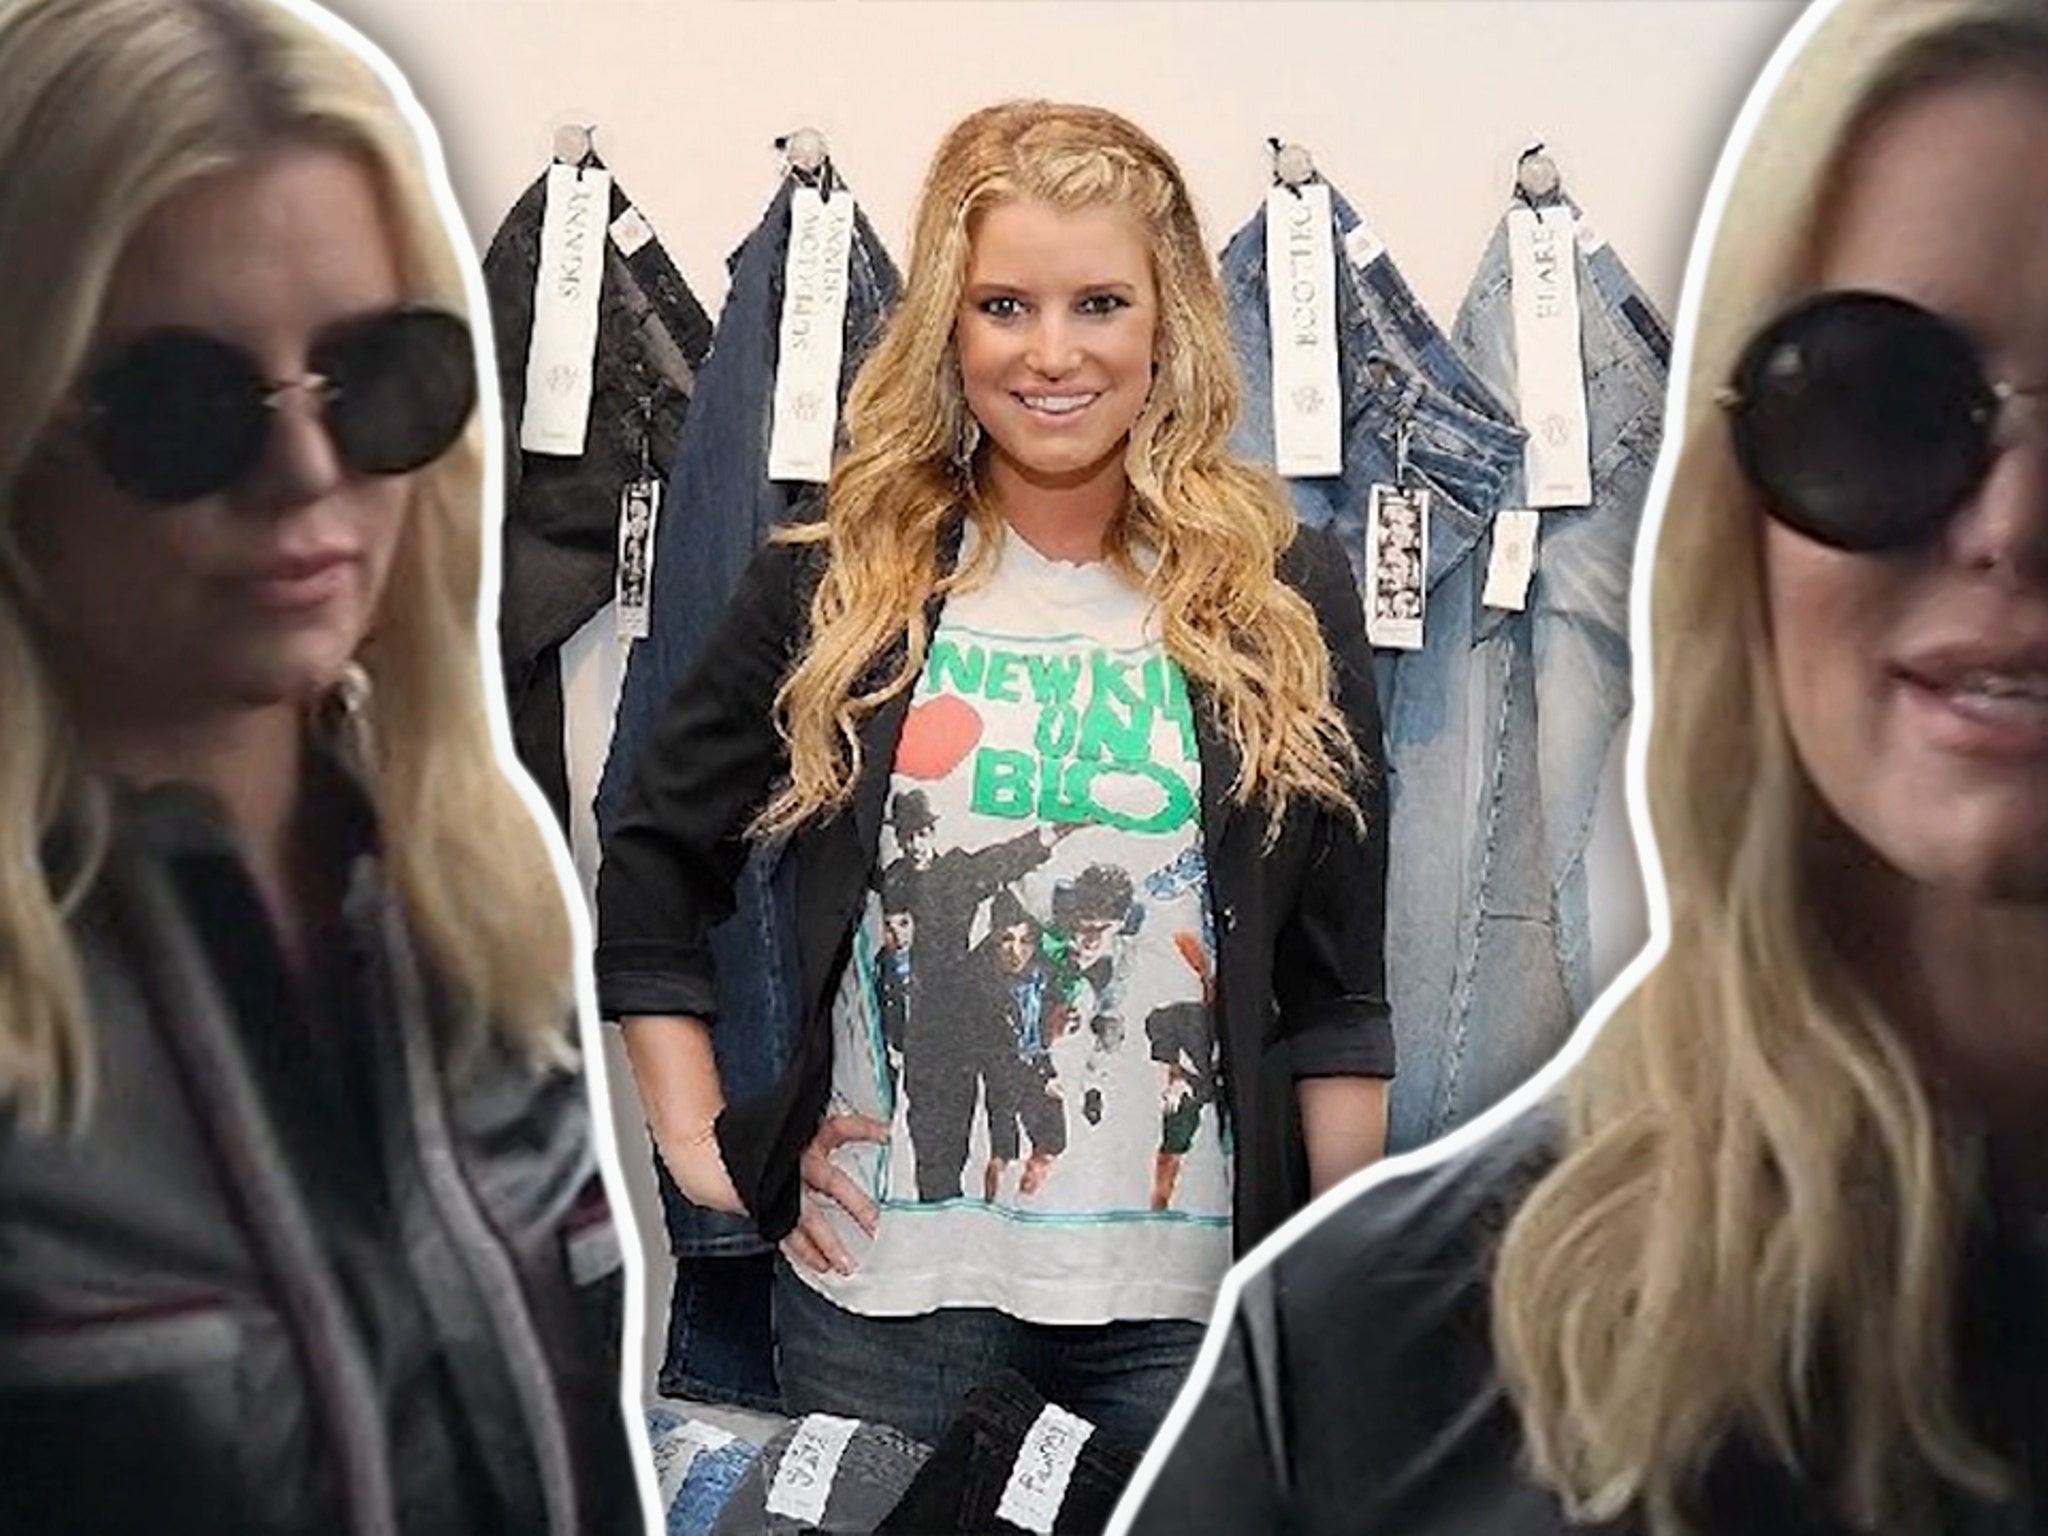 Jessica Simpson Gets Soused!